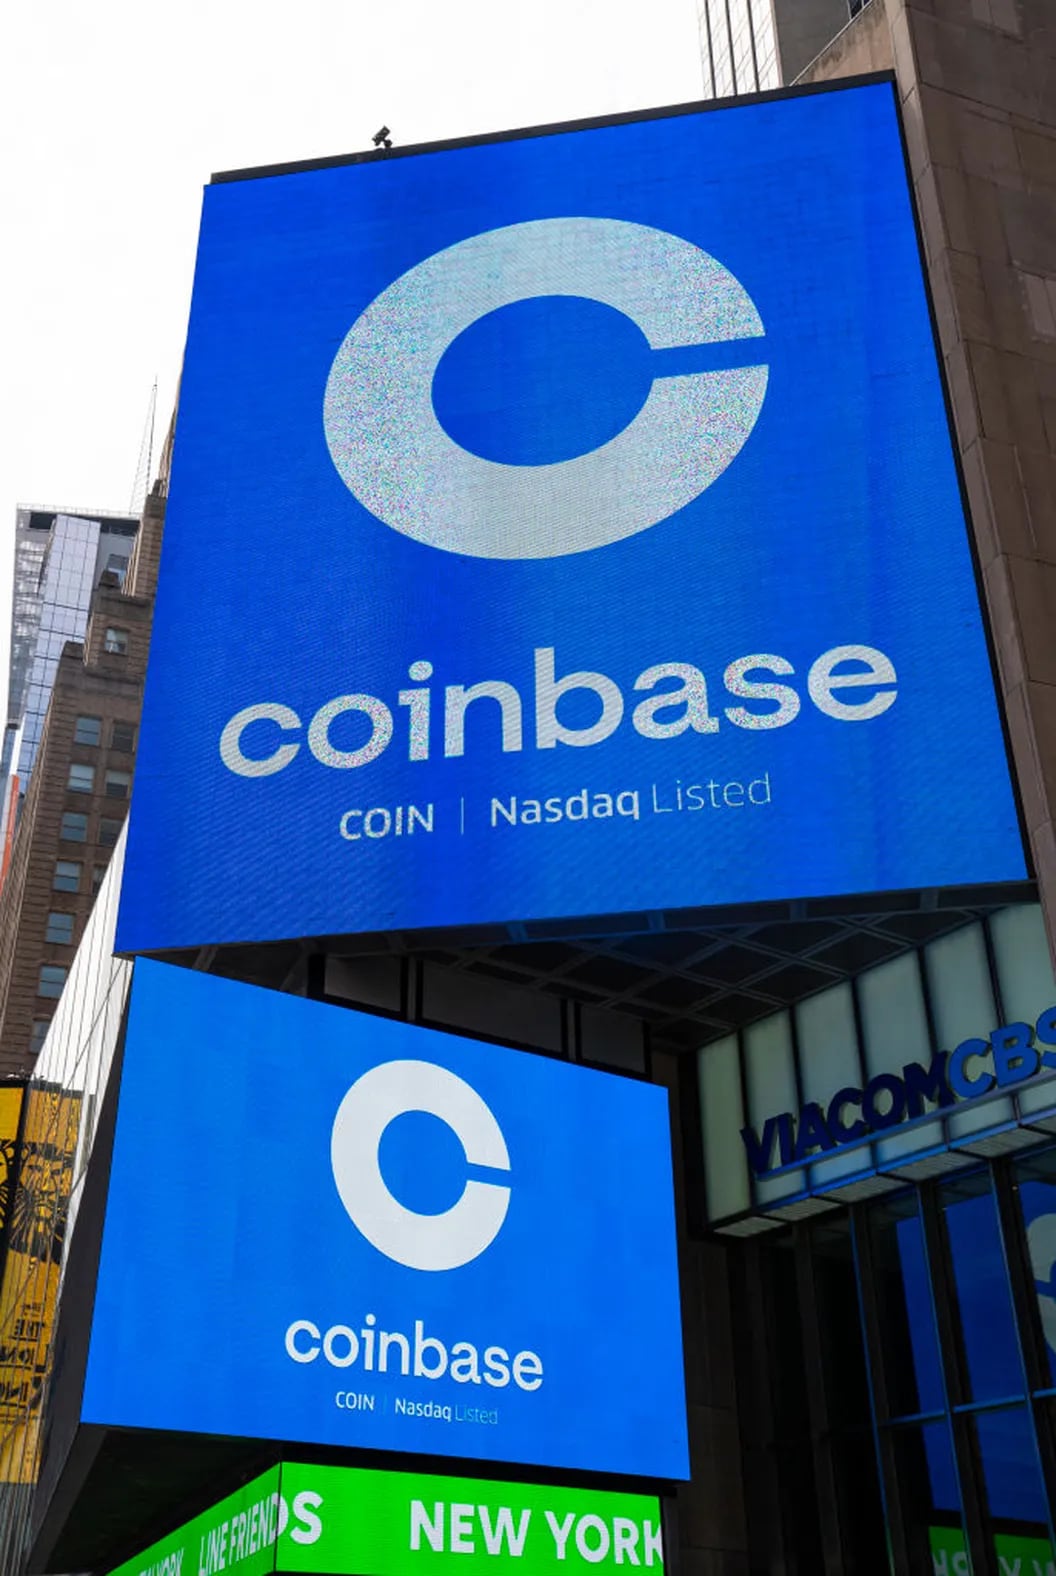 Crypto Exchange Coinbase Could Earn .2B in Revenue Next Year From Higher Interest Rates, JPMorgan Says